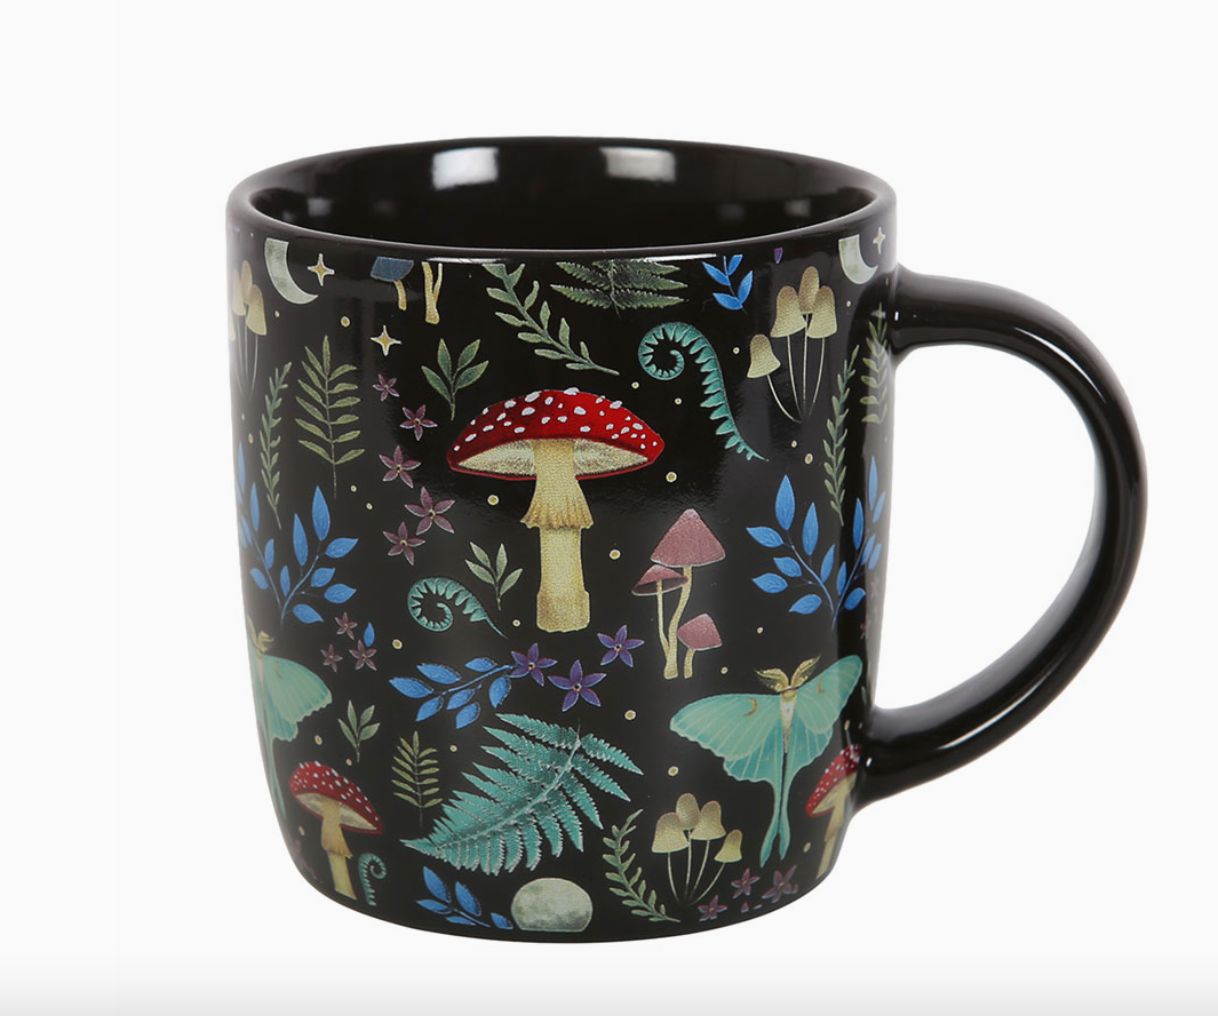 Black mug with a 'mystical forest' print with toadstools, moths, various foliage a star and moon